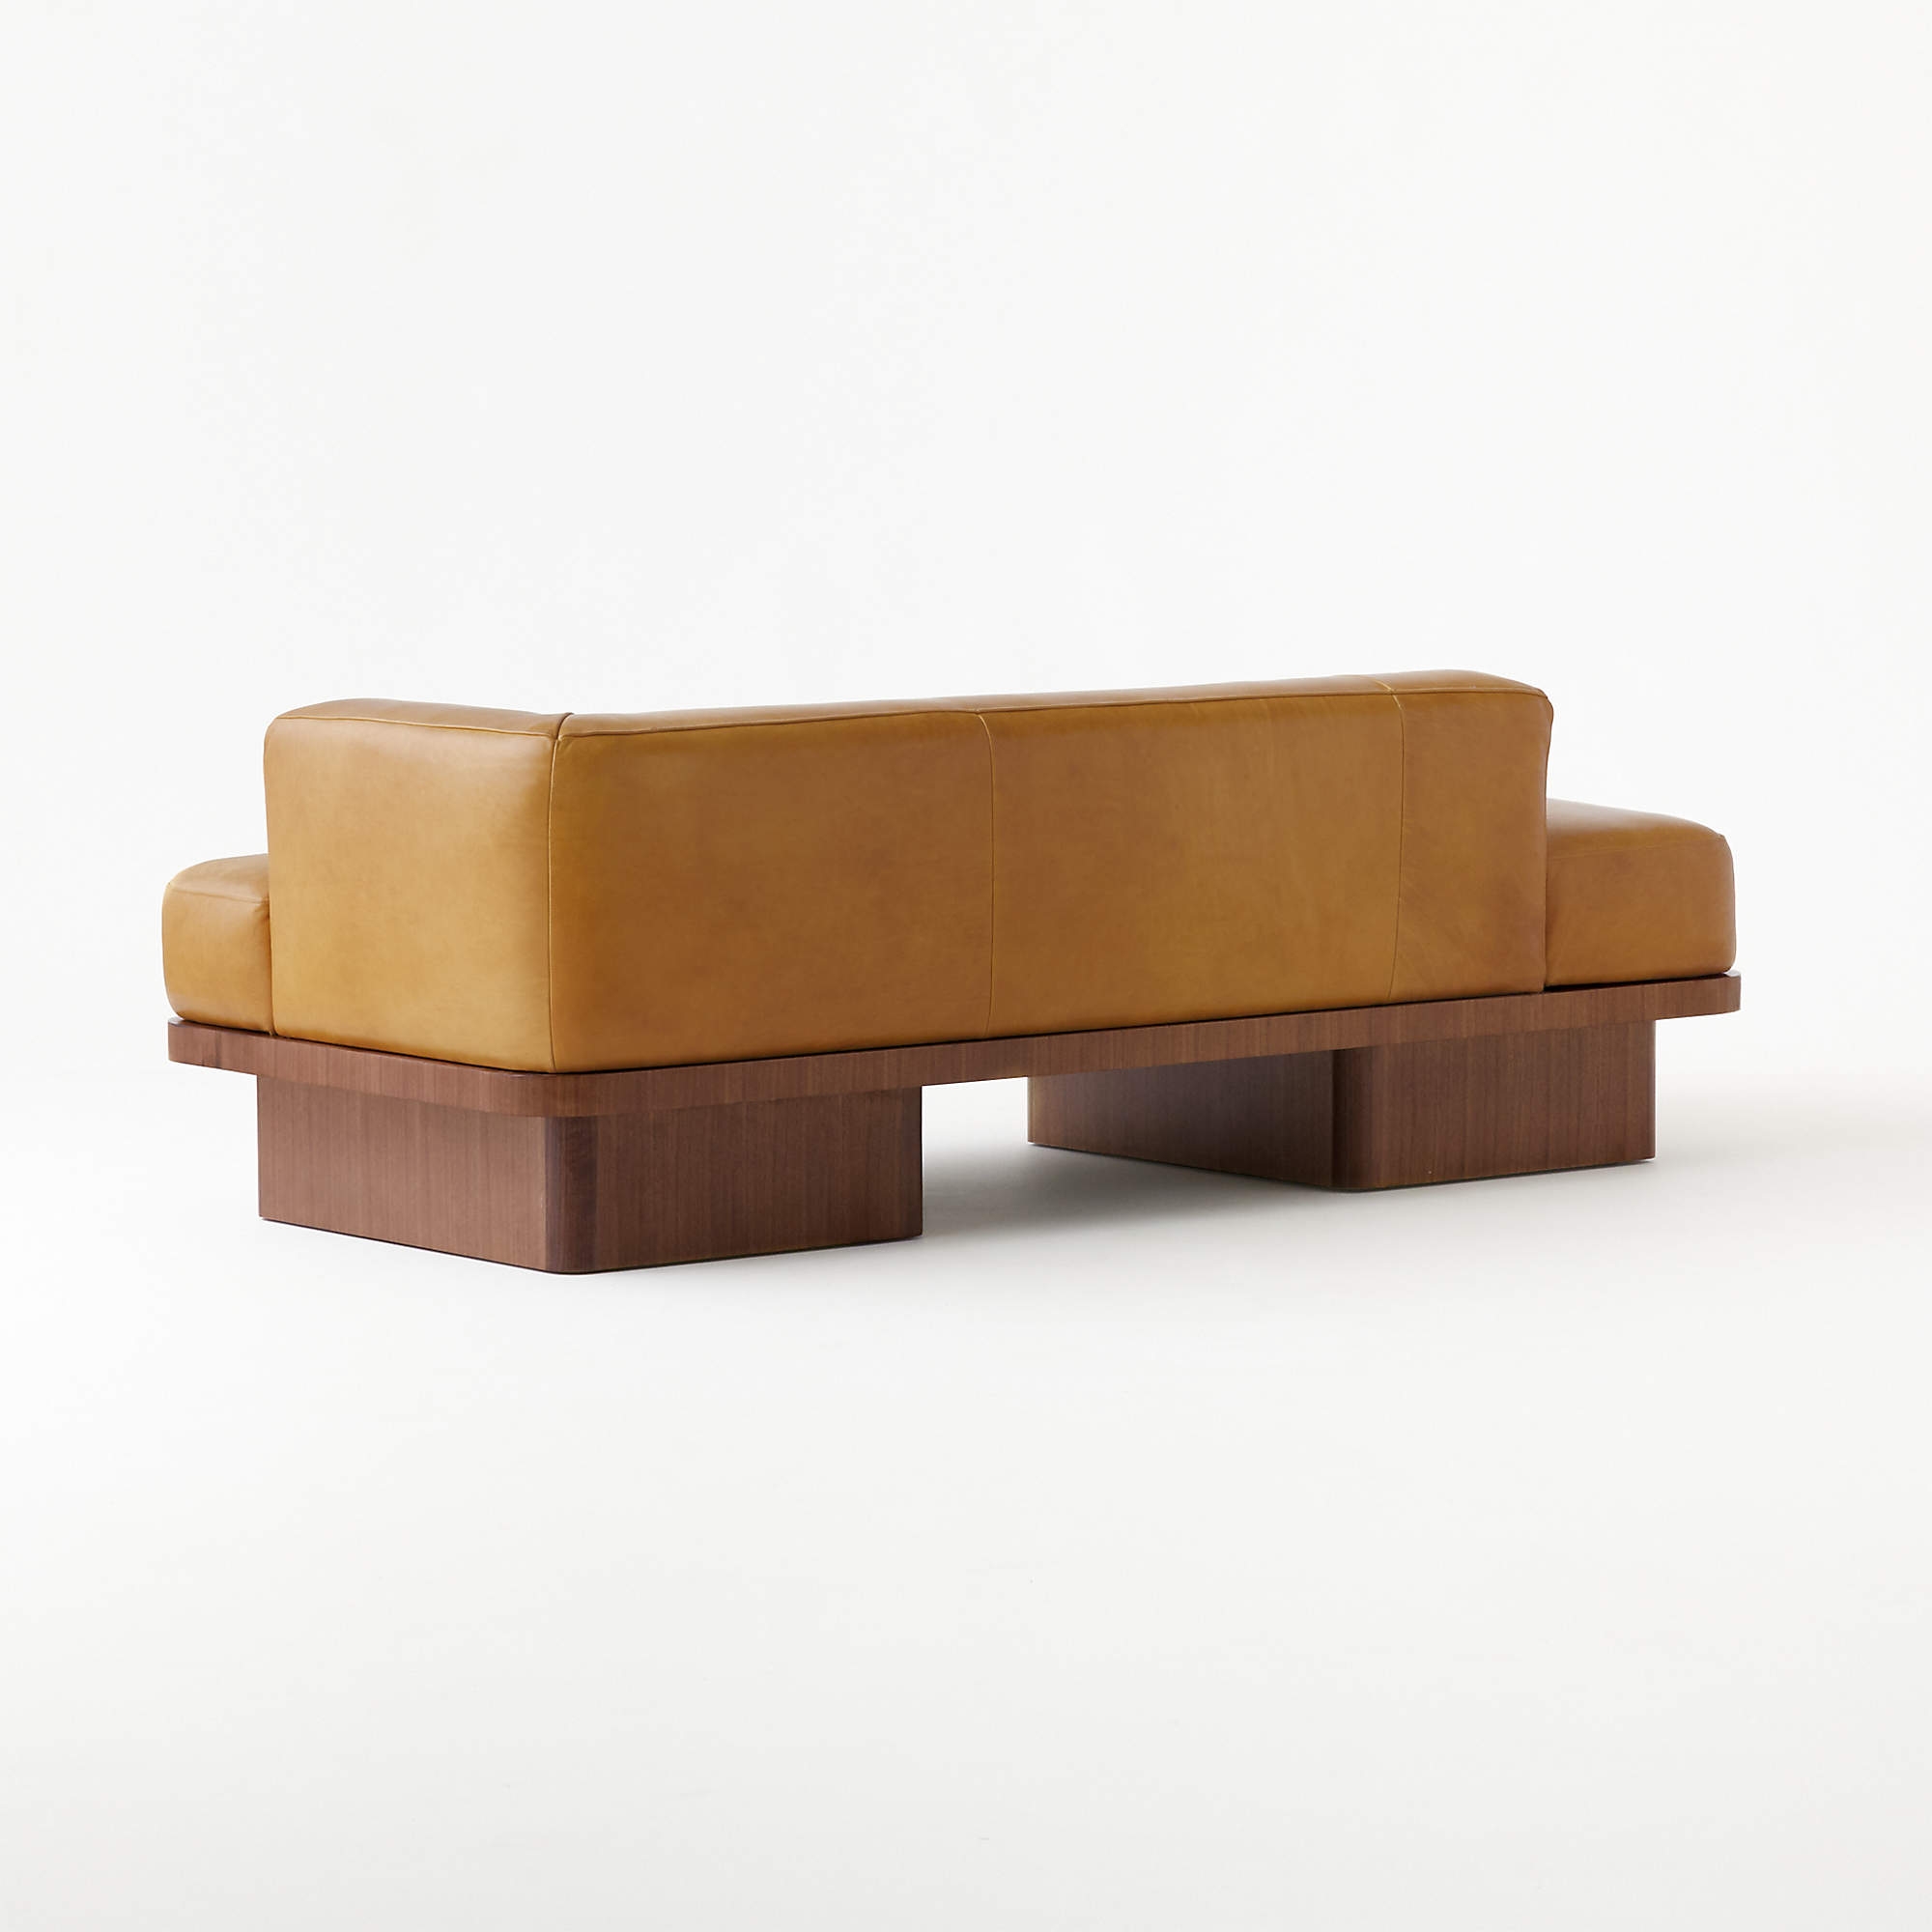 Serafin 81" Brown Leather Daybed - Image 5